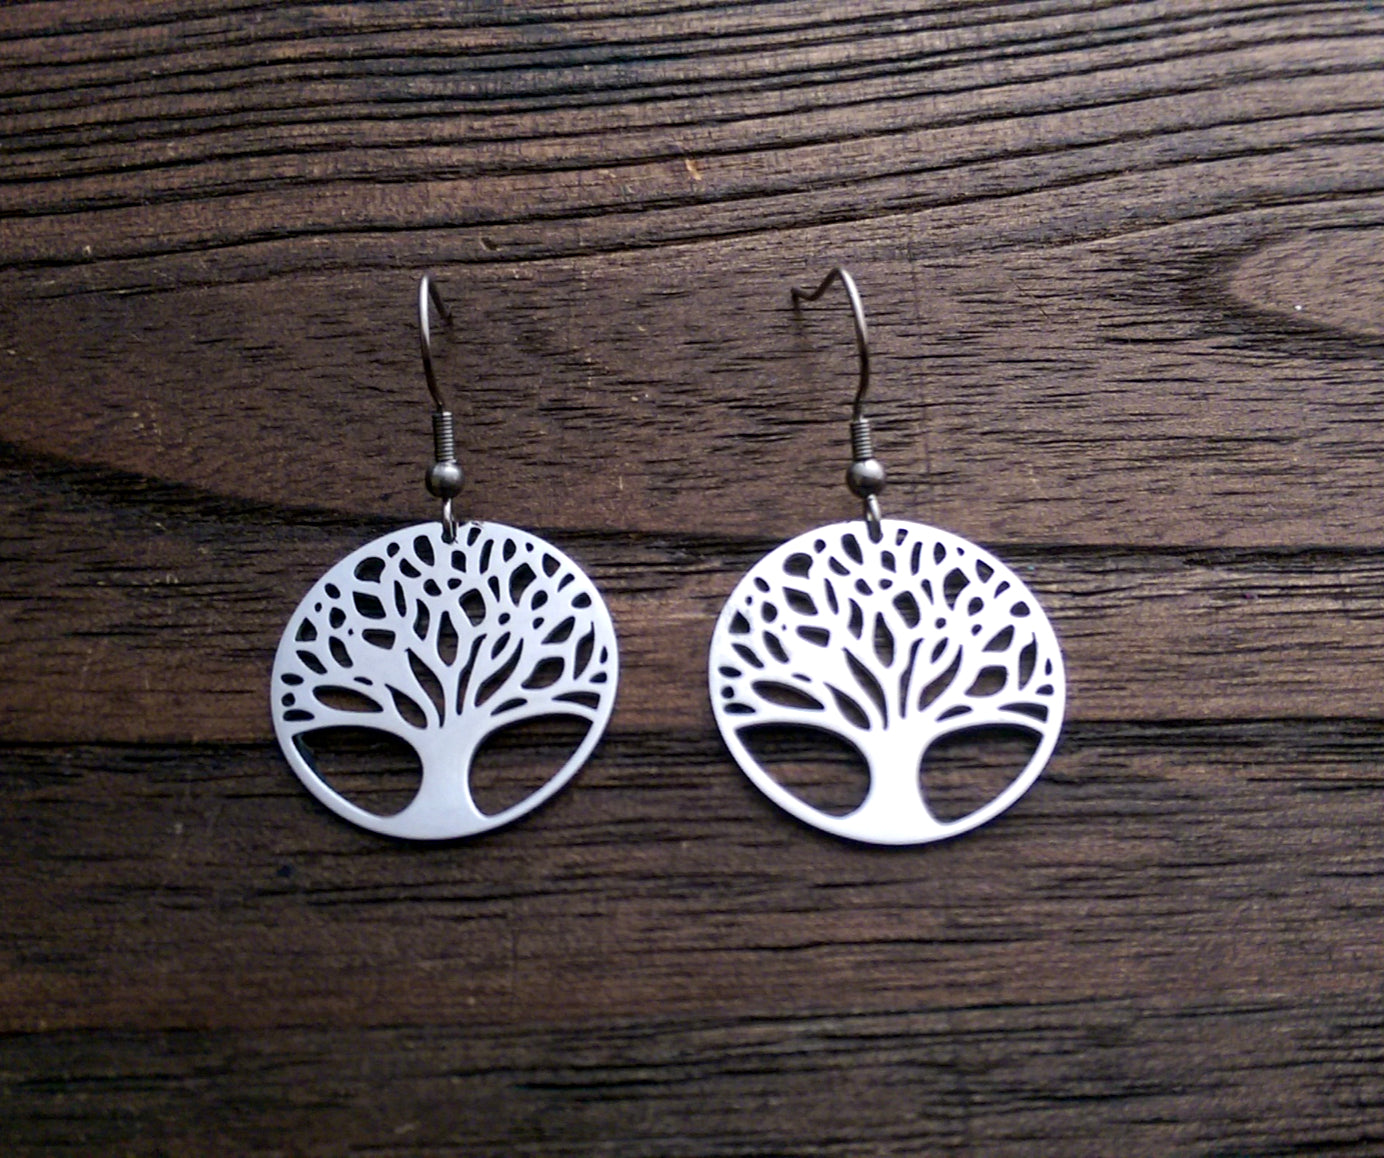 Stainless Steel Tree of Life Dangle Hook Earrings. - Silver and Resin Designs